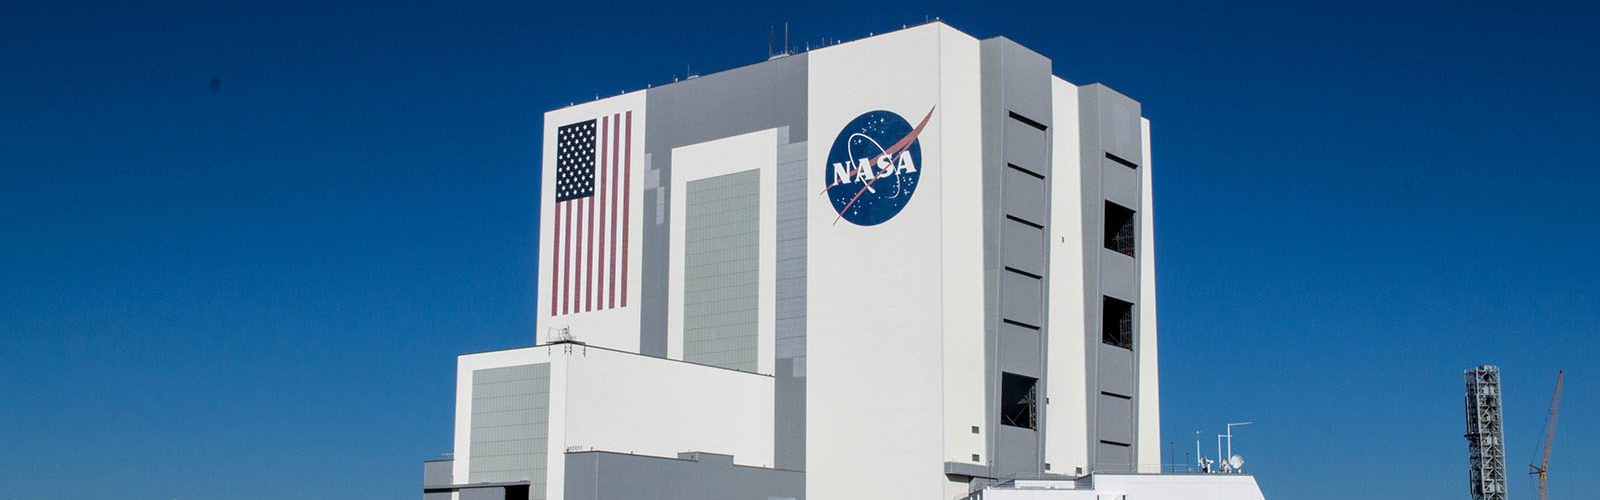 kennedy-space-center-titusville-lancement-fusees-une